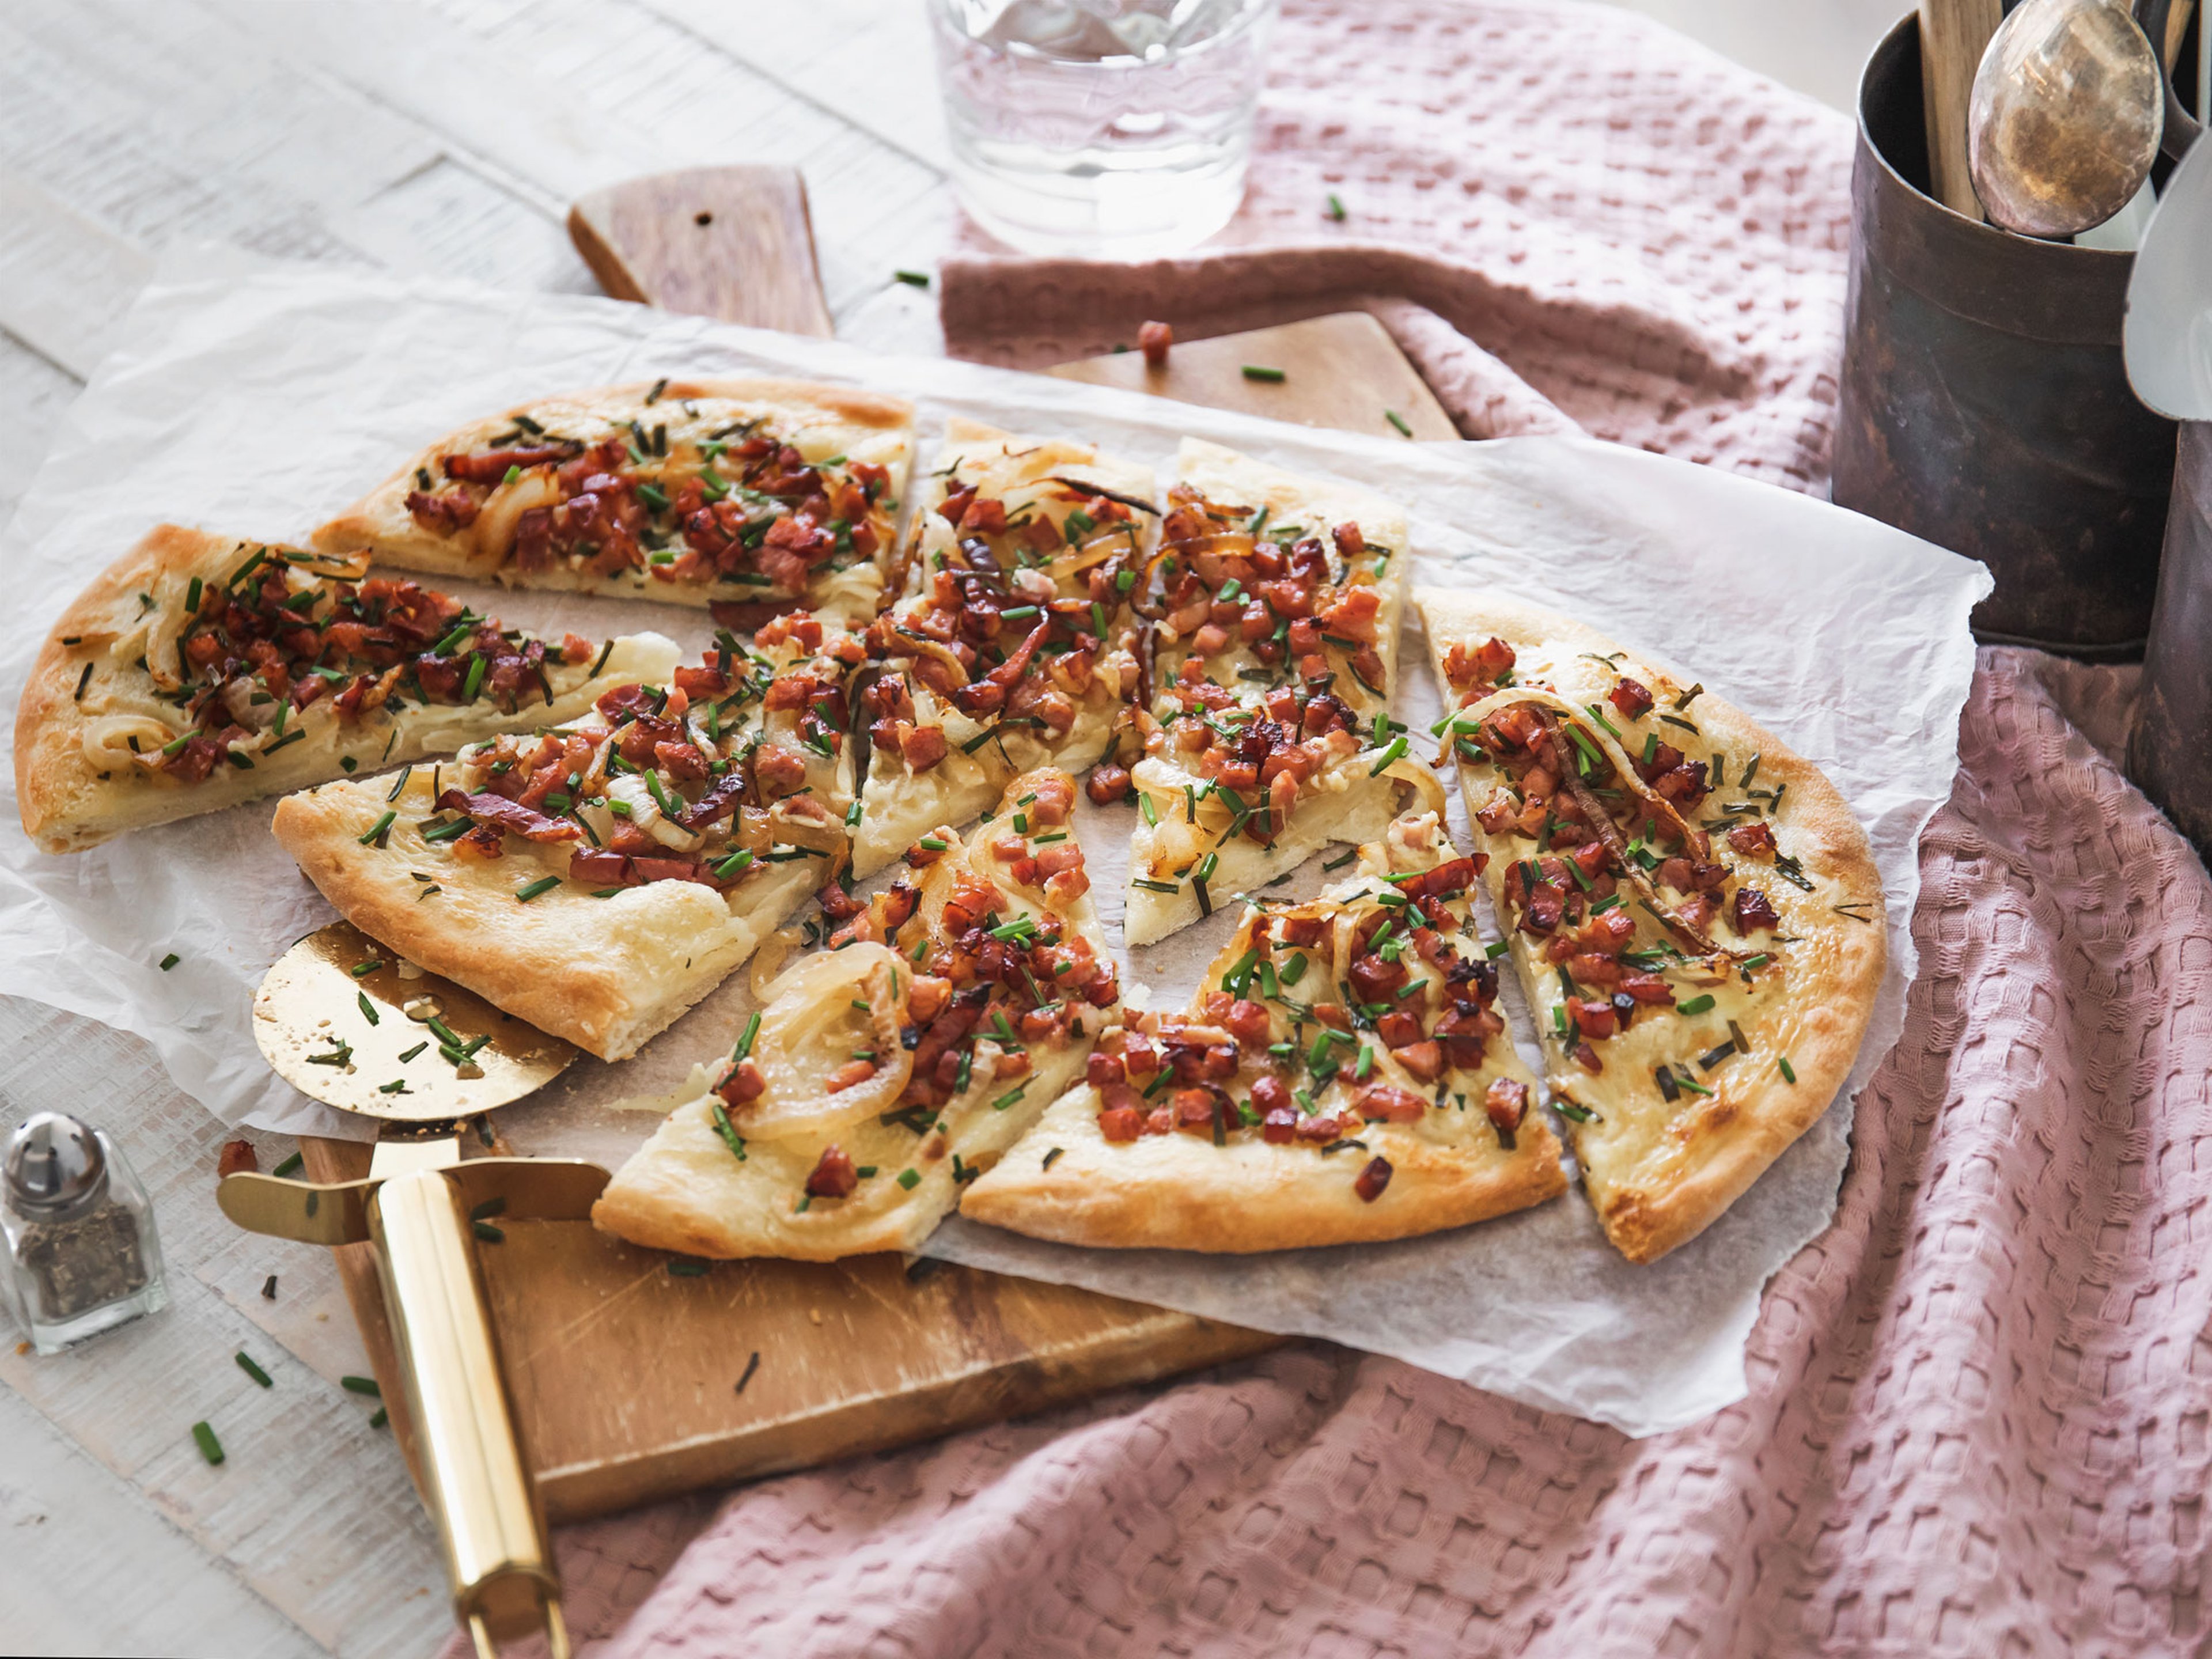 The World’s Greatest Tarte Flambée Doesn’t Have to Be Perfect